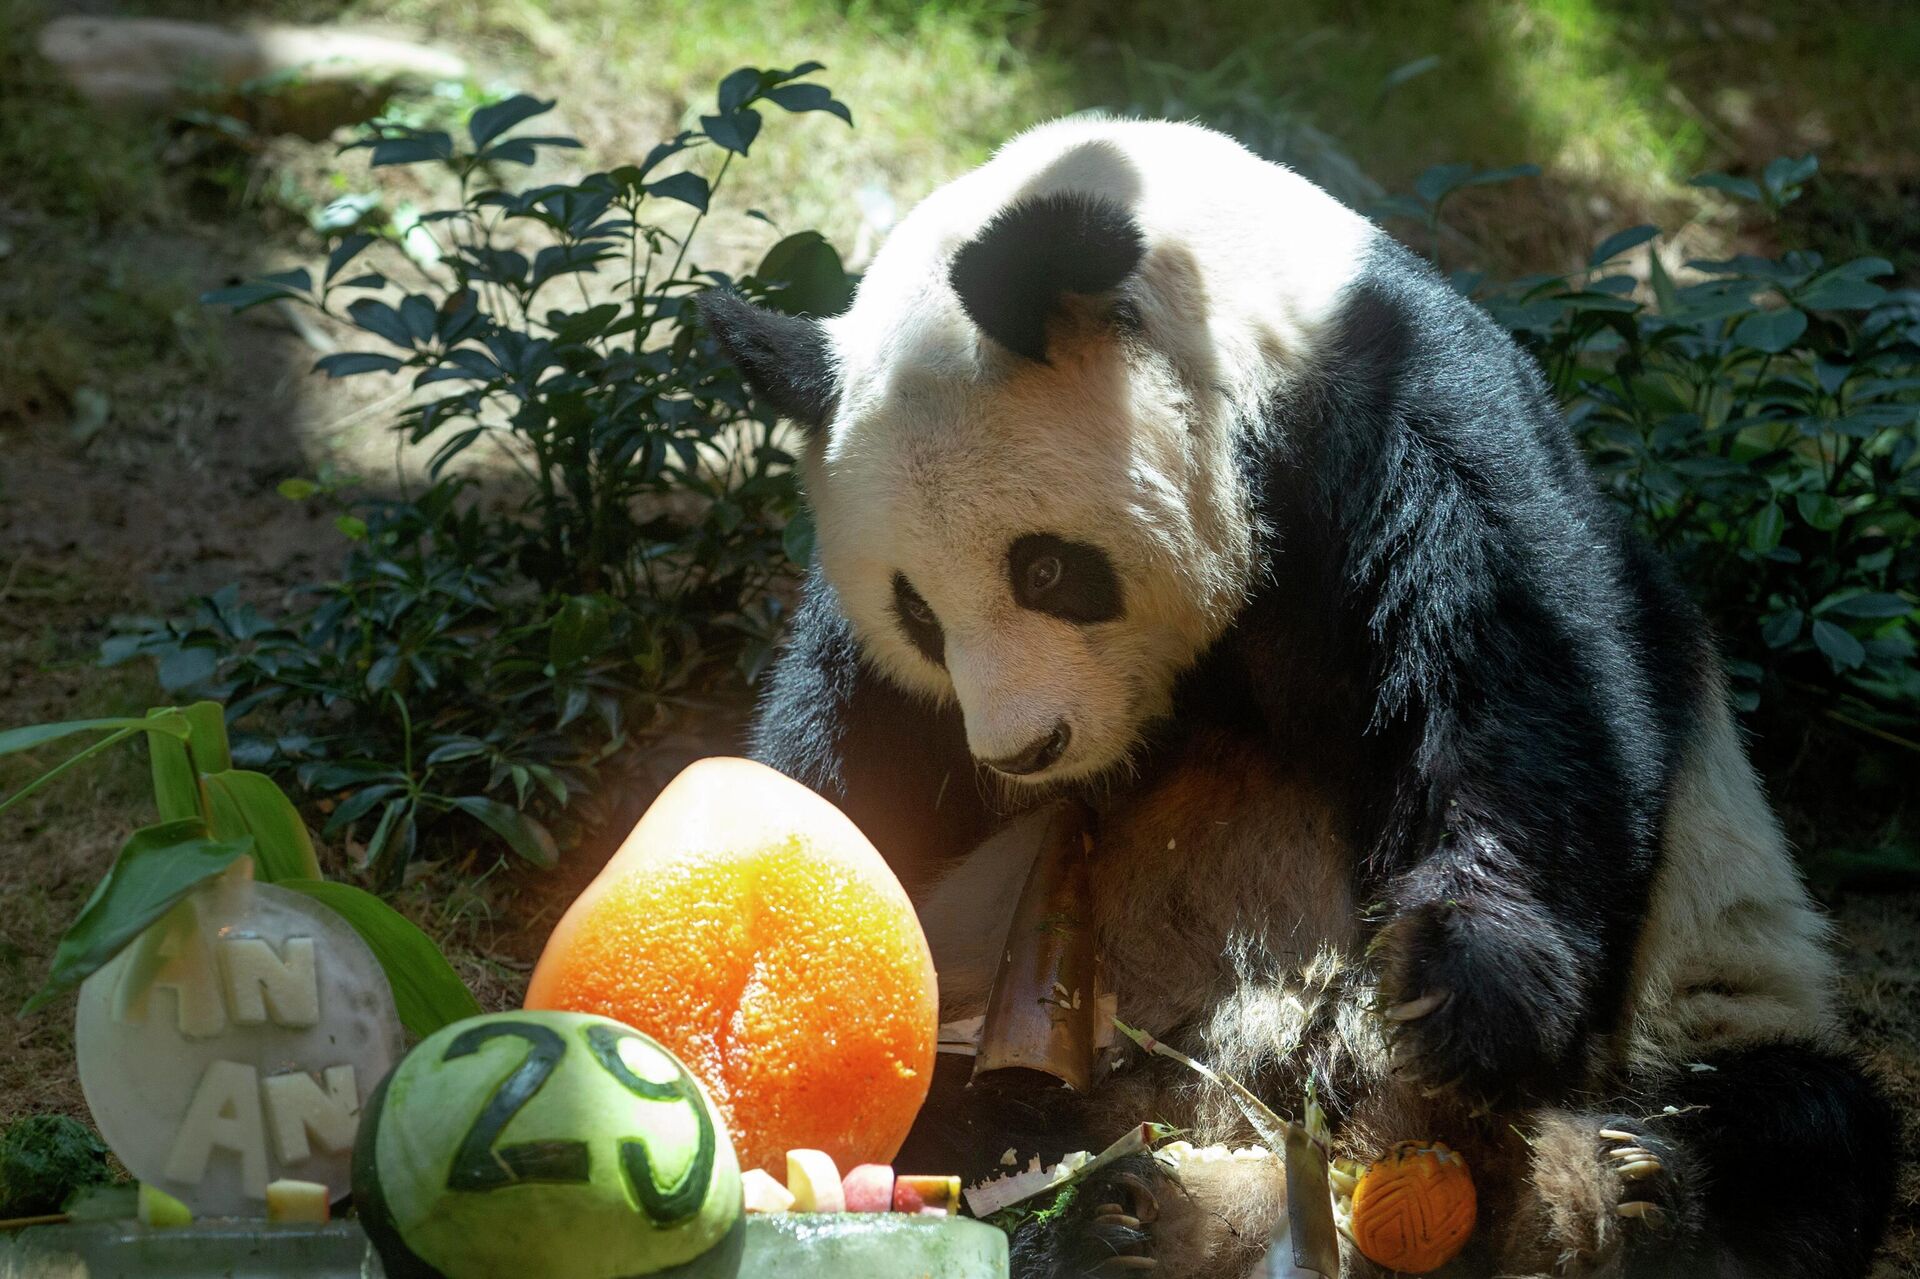 Chinese Giant panda An An celebrates his 29th birthday at the Ocean Park in Hong Kong on July 28, 2015. The world's oldest-ever male giant panda in captivity on Thursday, July 21, 2022 passed away after being euthanized in Hong Kong, following a deterioration in his health in recent weeks - Sputnik International, 1920, 21.07.2022